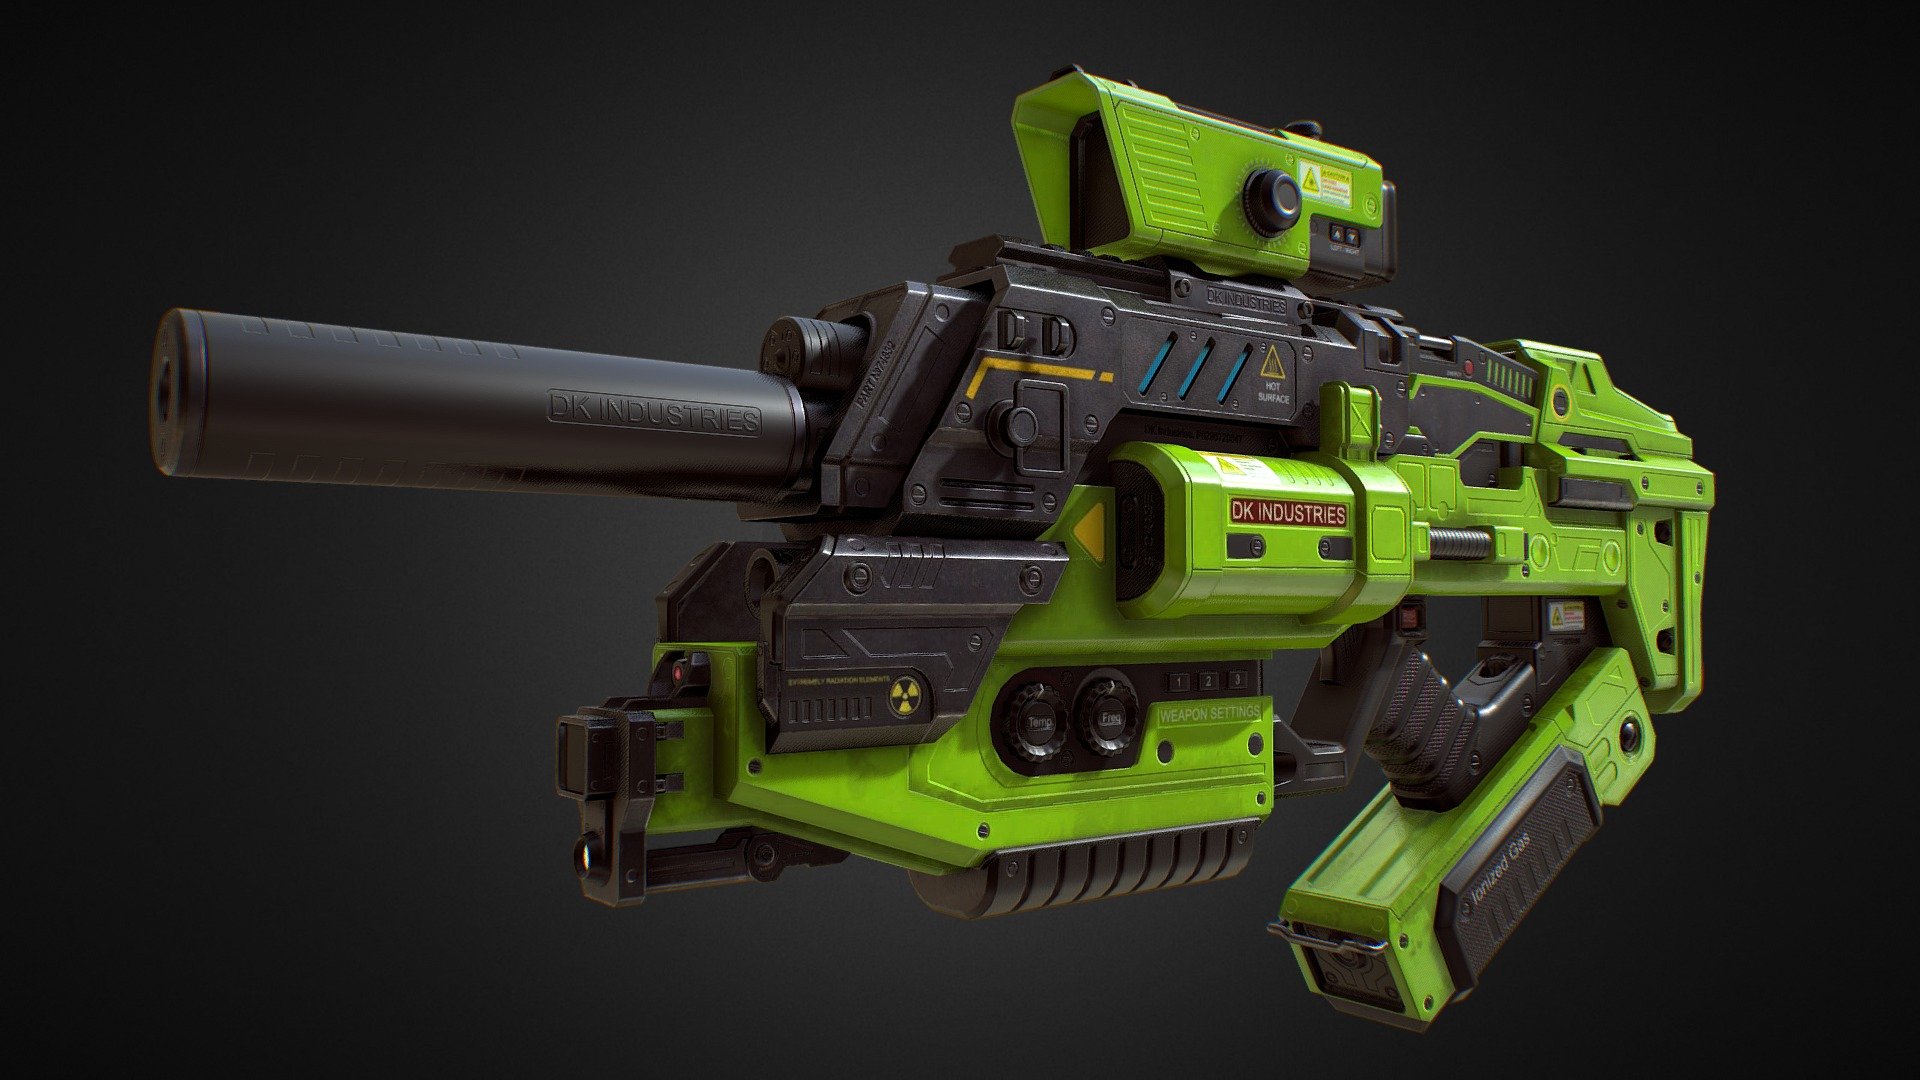 PBR Modular Plasma Gun from Sci-Fi weapon pack 
Unity Assetstore:   PBR SciFi Weapons v2
CG trader:   PBR SciFi Weapons v2
With movable parts and hires textures - PBR Assault Plasma Gun (Green Skin) - 3D model by Dmitrii_Kutsenko (@Dmitrii_Kutcenko) 3d model